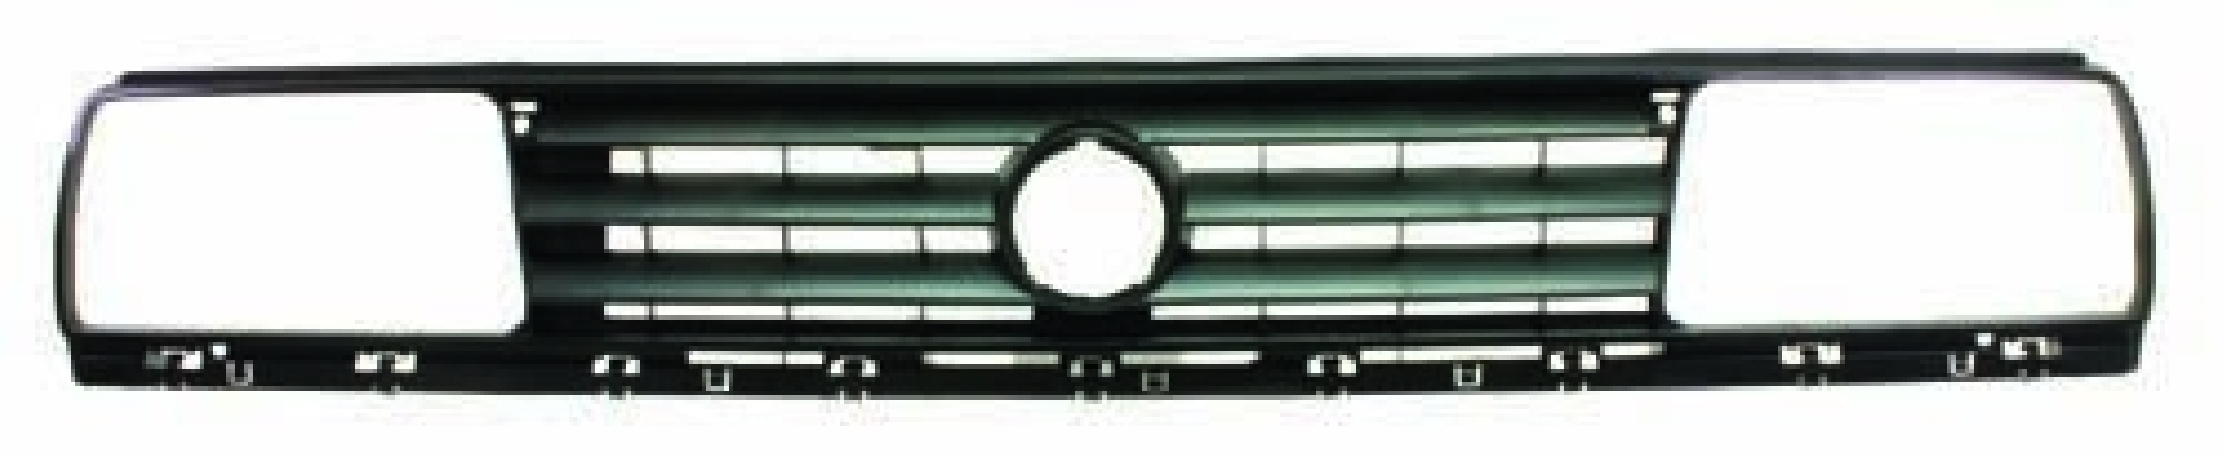 Front Grille, Reproduction, Mk2 Jetta 88-92